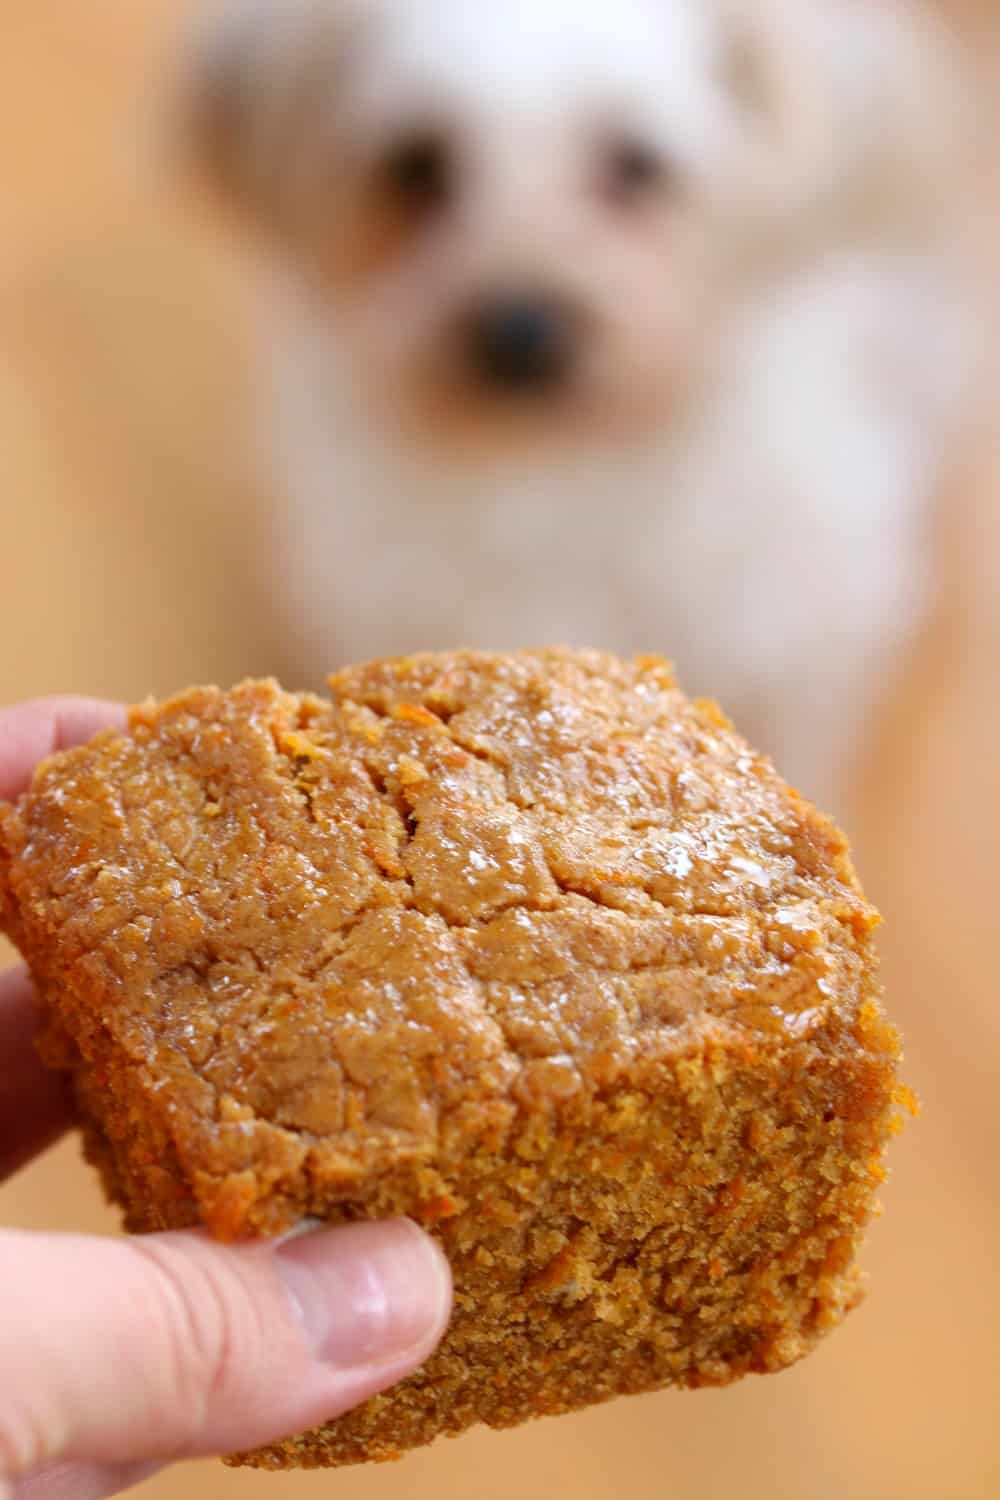 A hand holding a piece of dog cake in the air with a dog starting at it in the background.